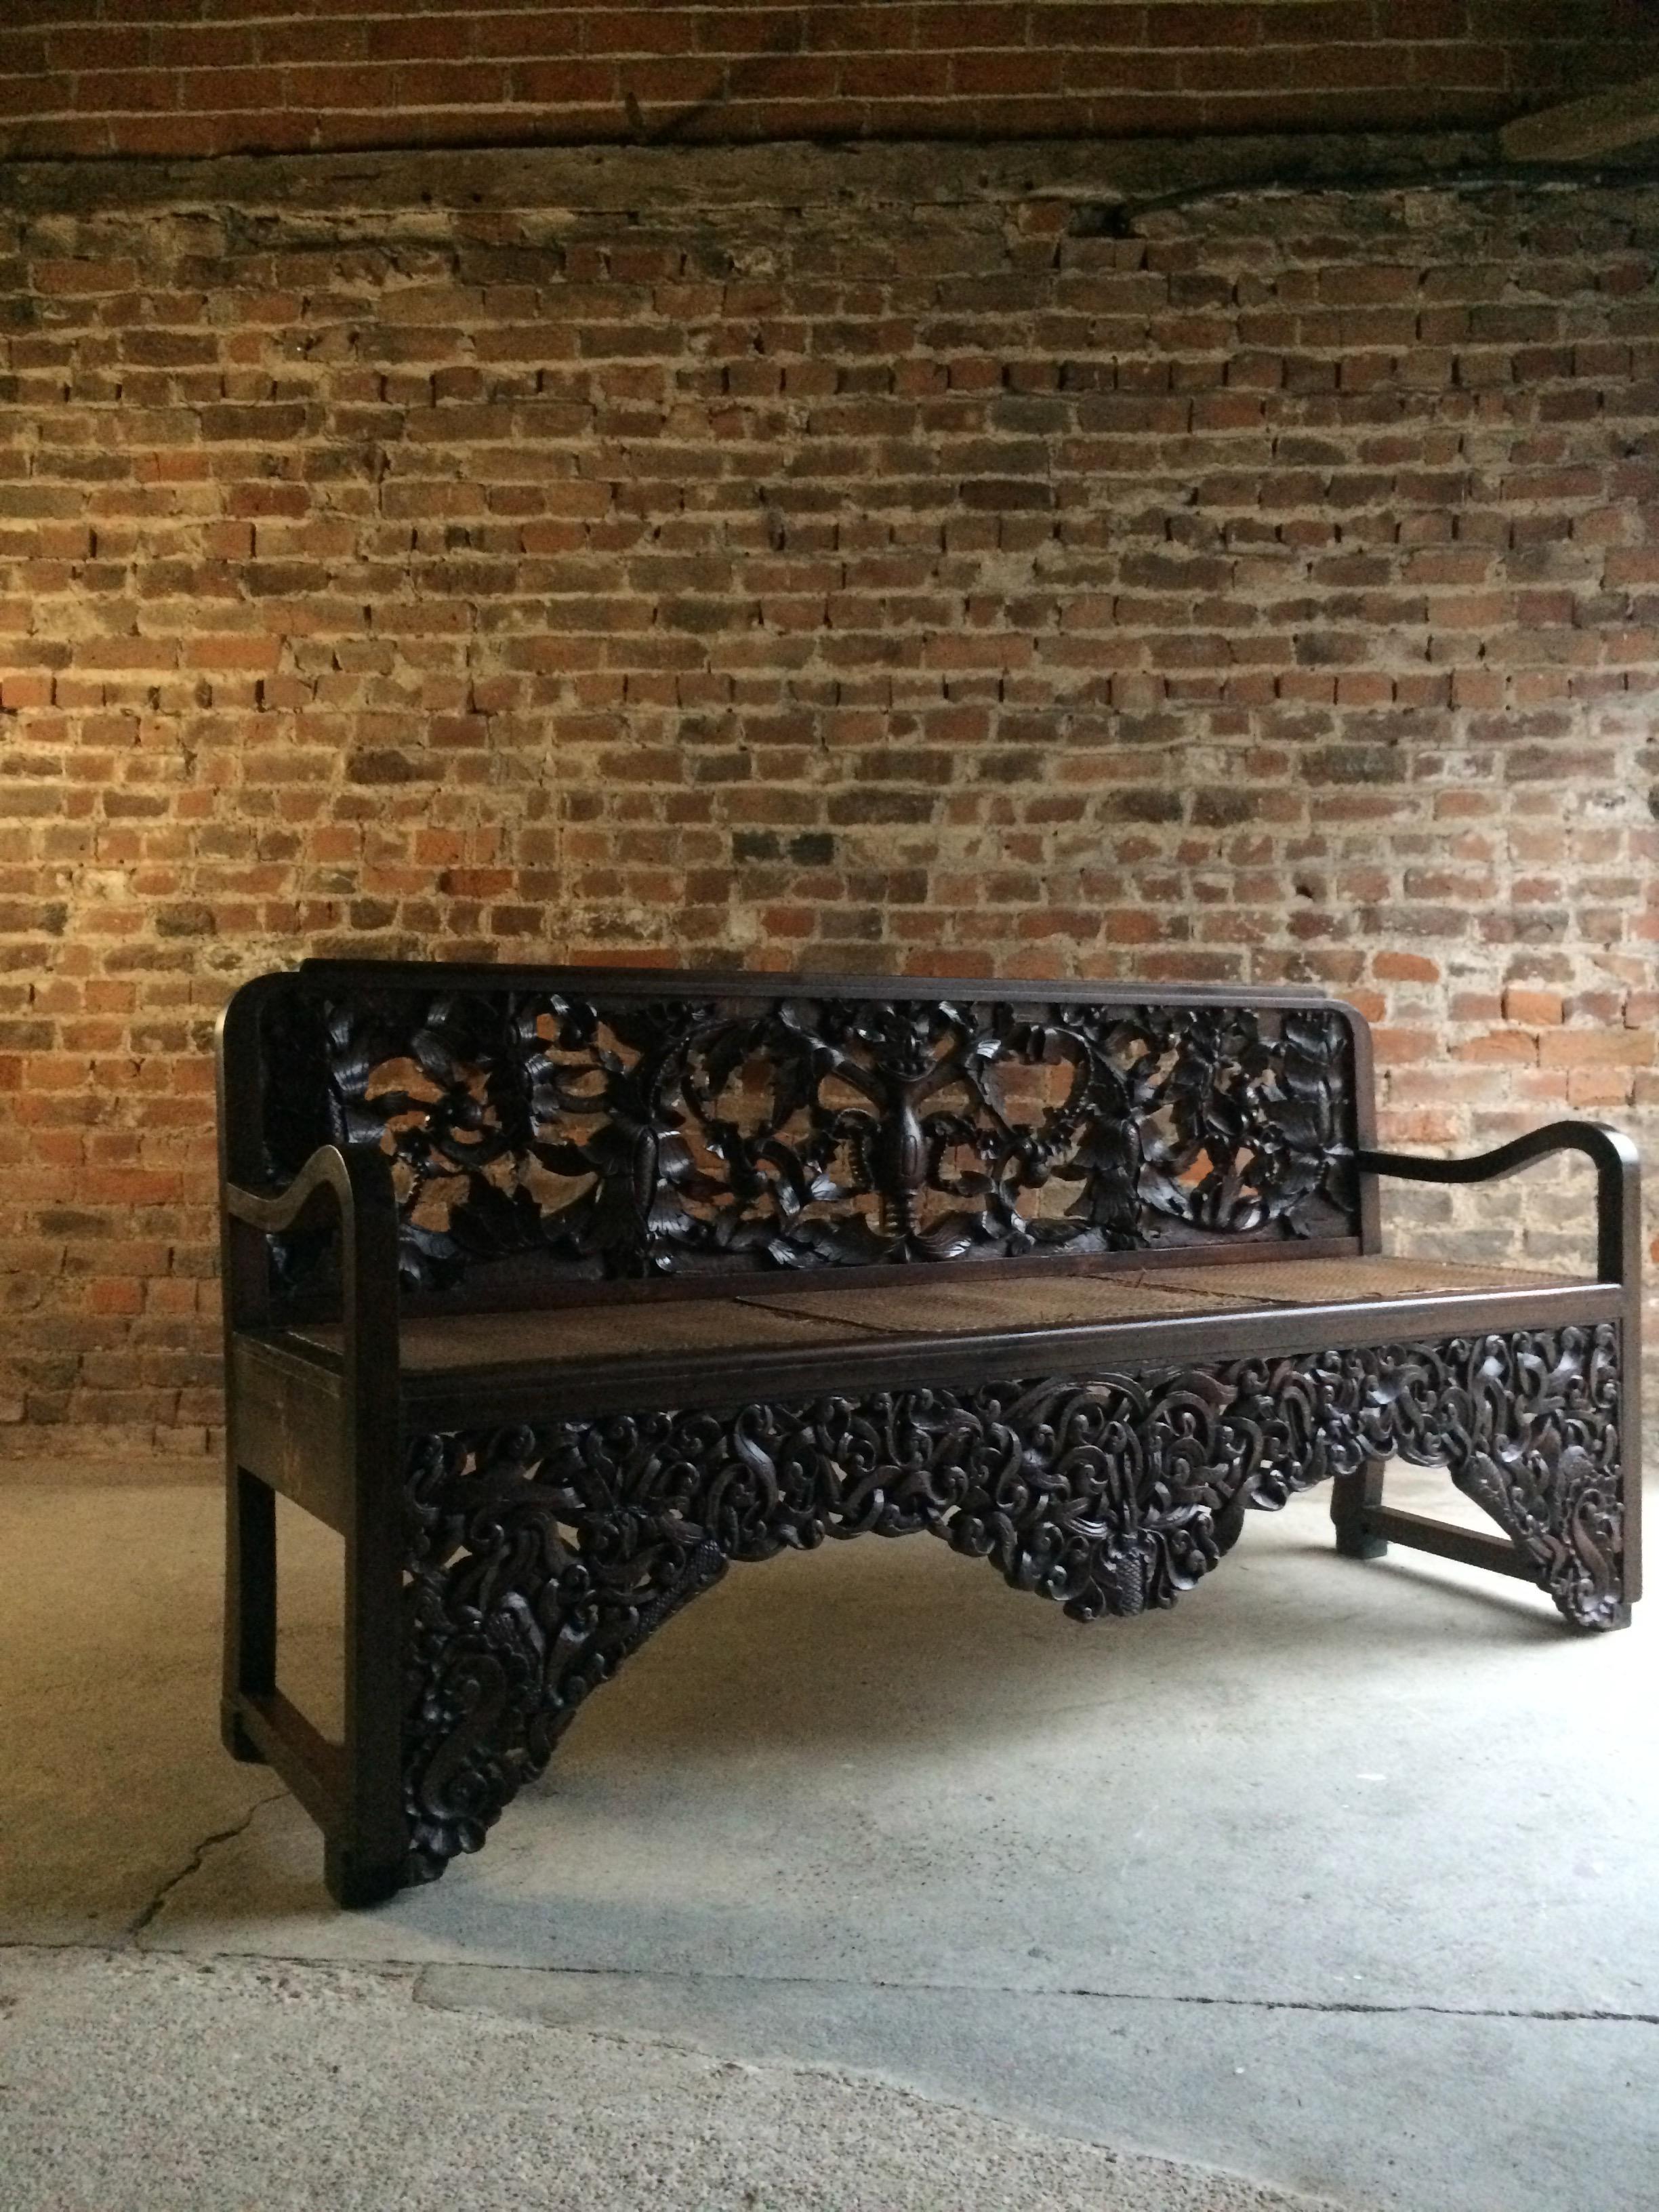 A magnificent early 20th century oriental hardwood cane seated hall bench circa 1900, the back and apron profusely carved with entwined scrolling lotus, raised on heavily carved legs.

Condition report: The bench is offered in good antique